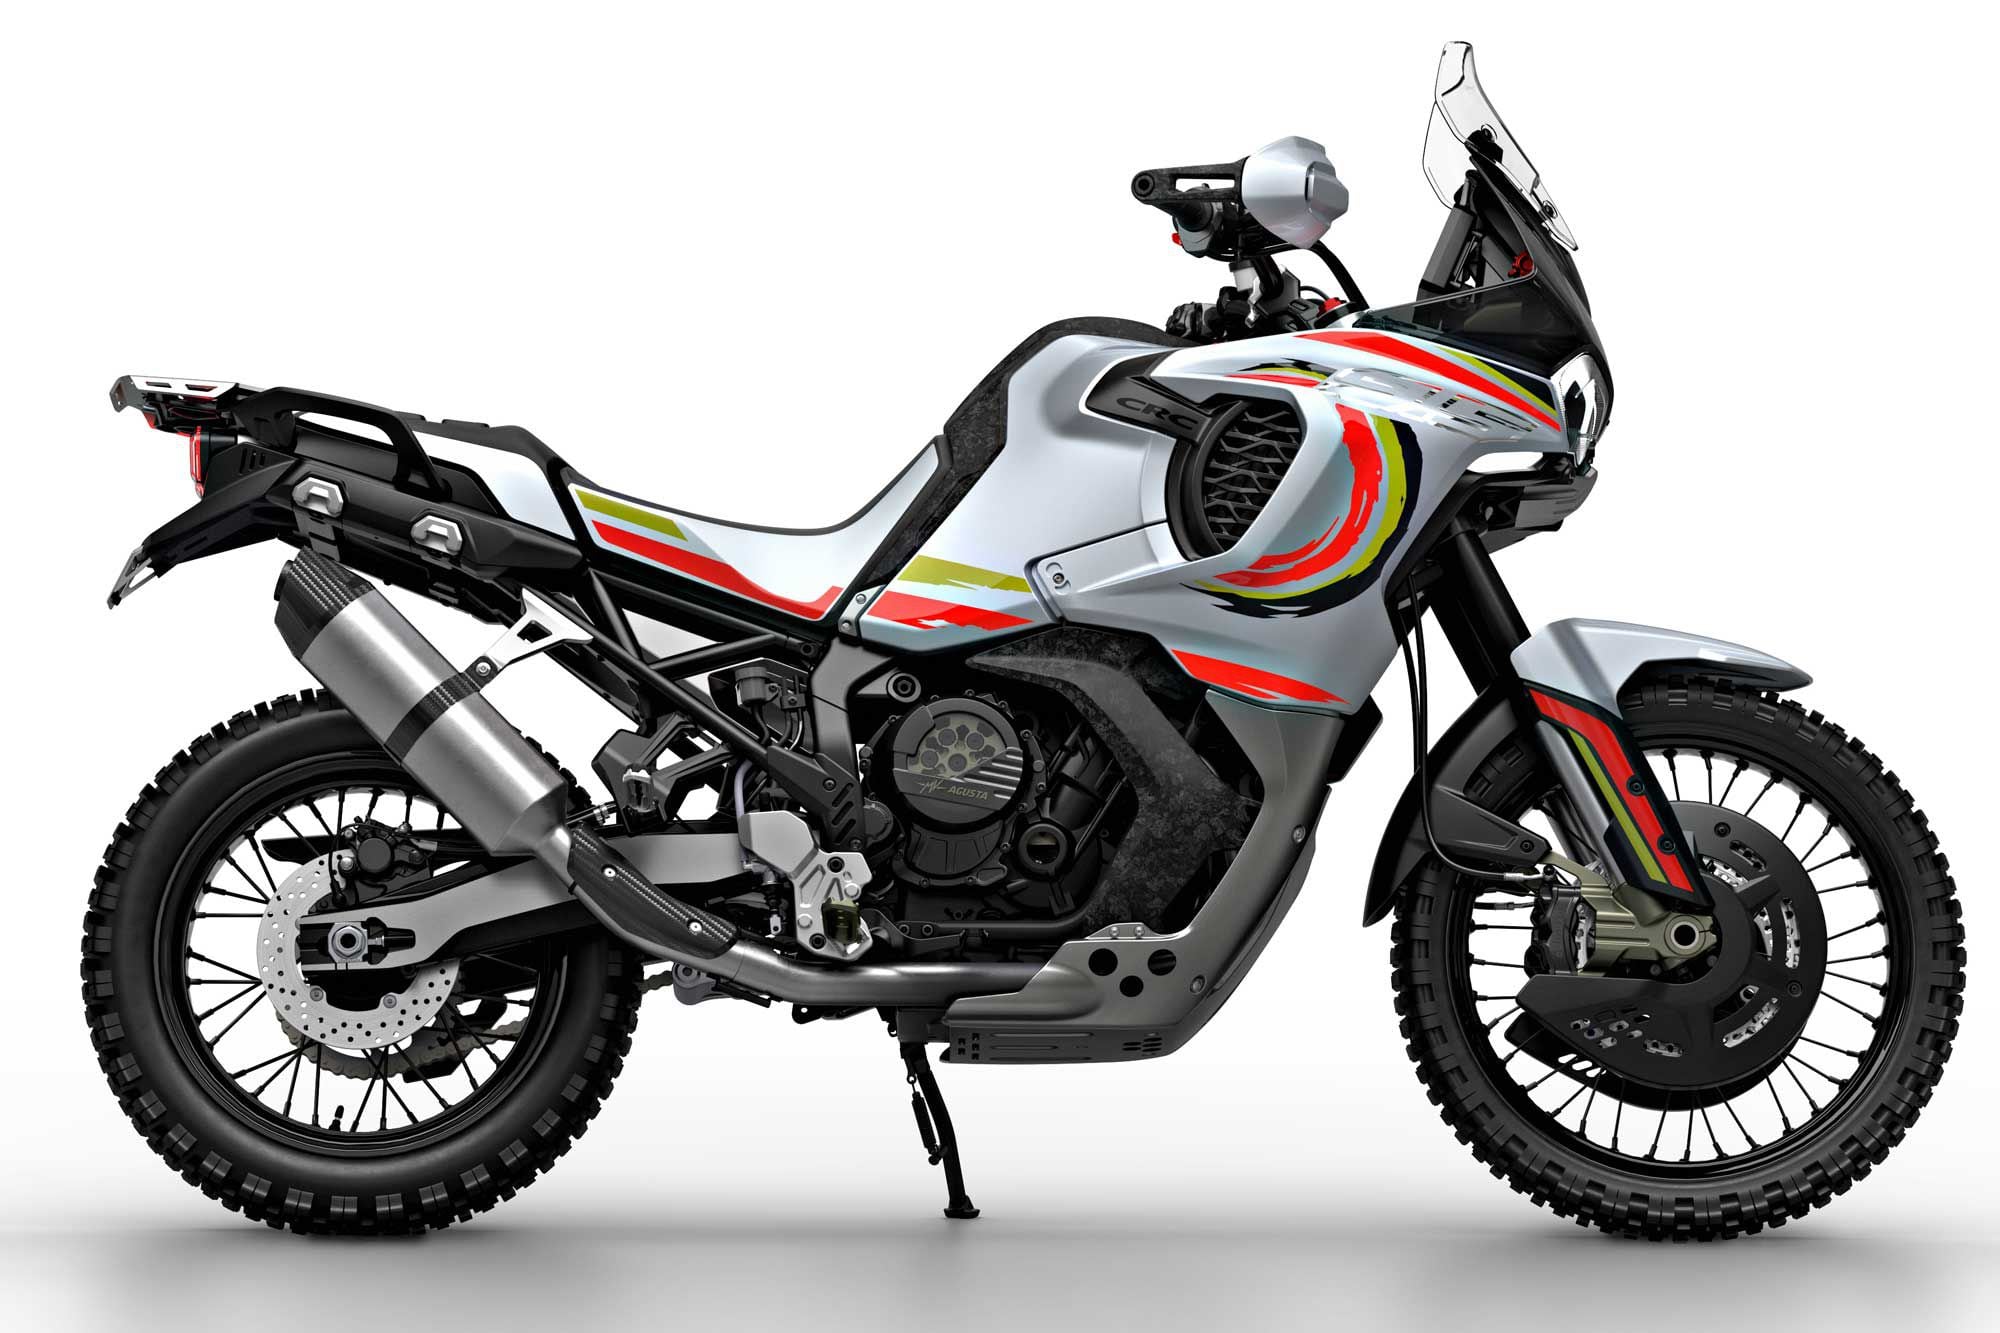 An MV Agusta without a single-sided swingarm? The Lucky Explorer 9.5 takes its off-road role seriously.